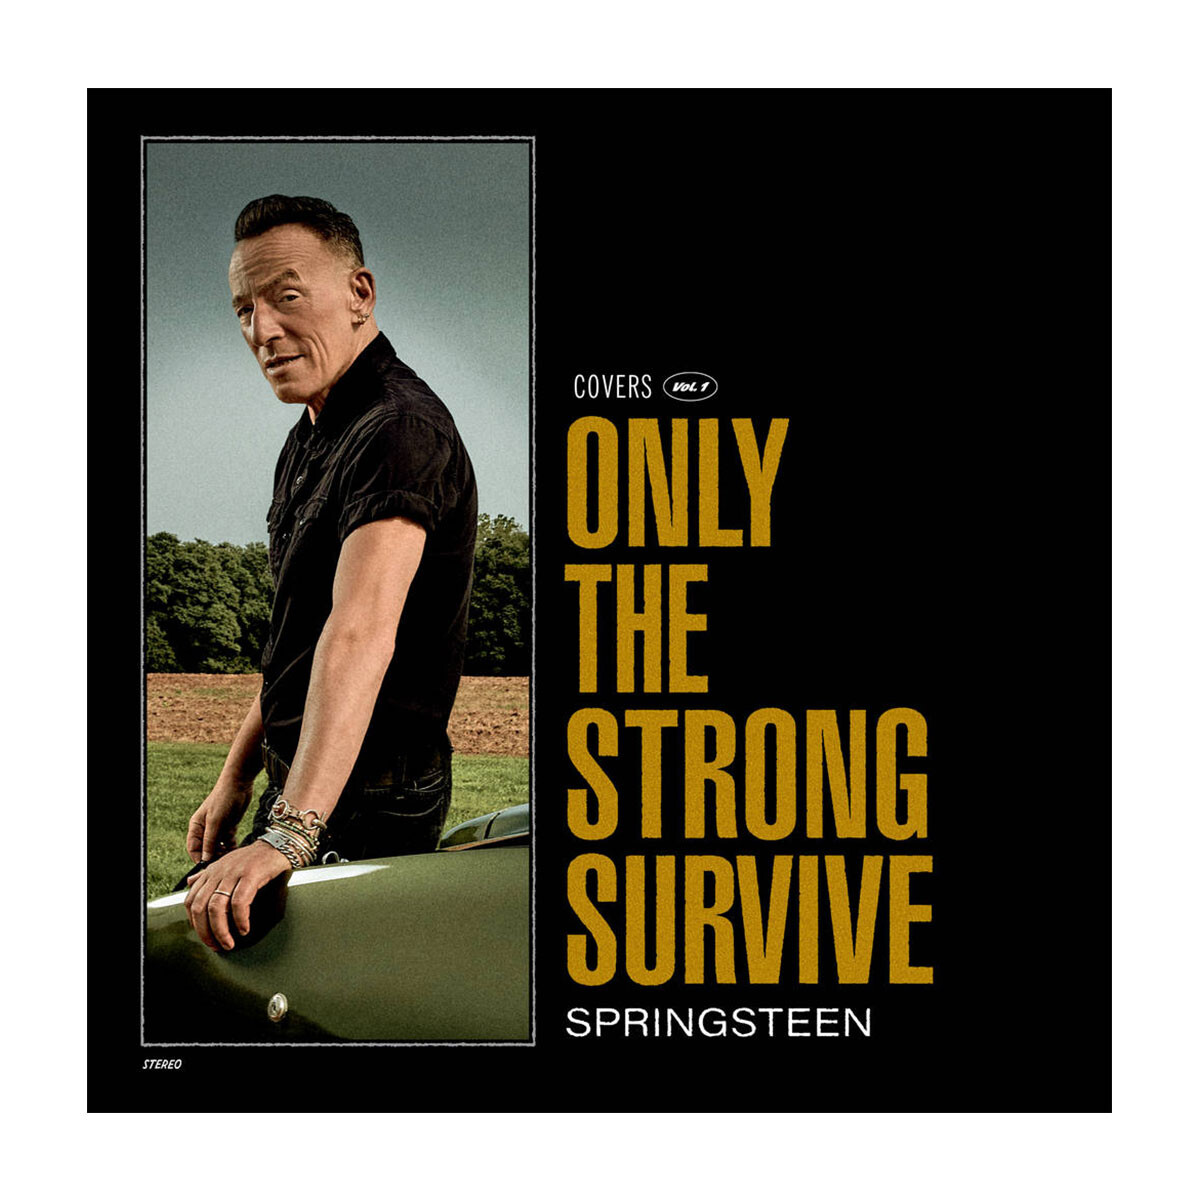 Springsteen, Bruce - Only The Strong Survive - Cd 